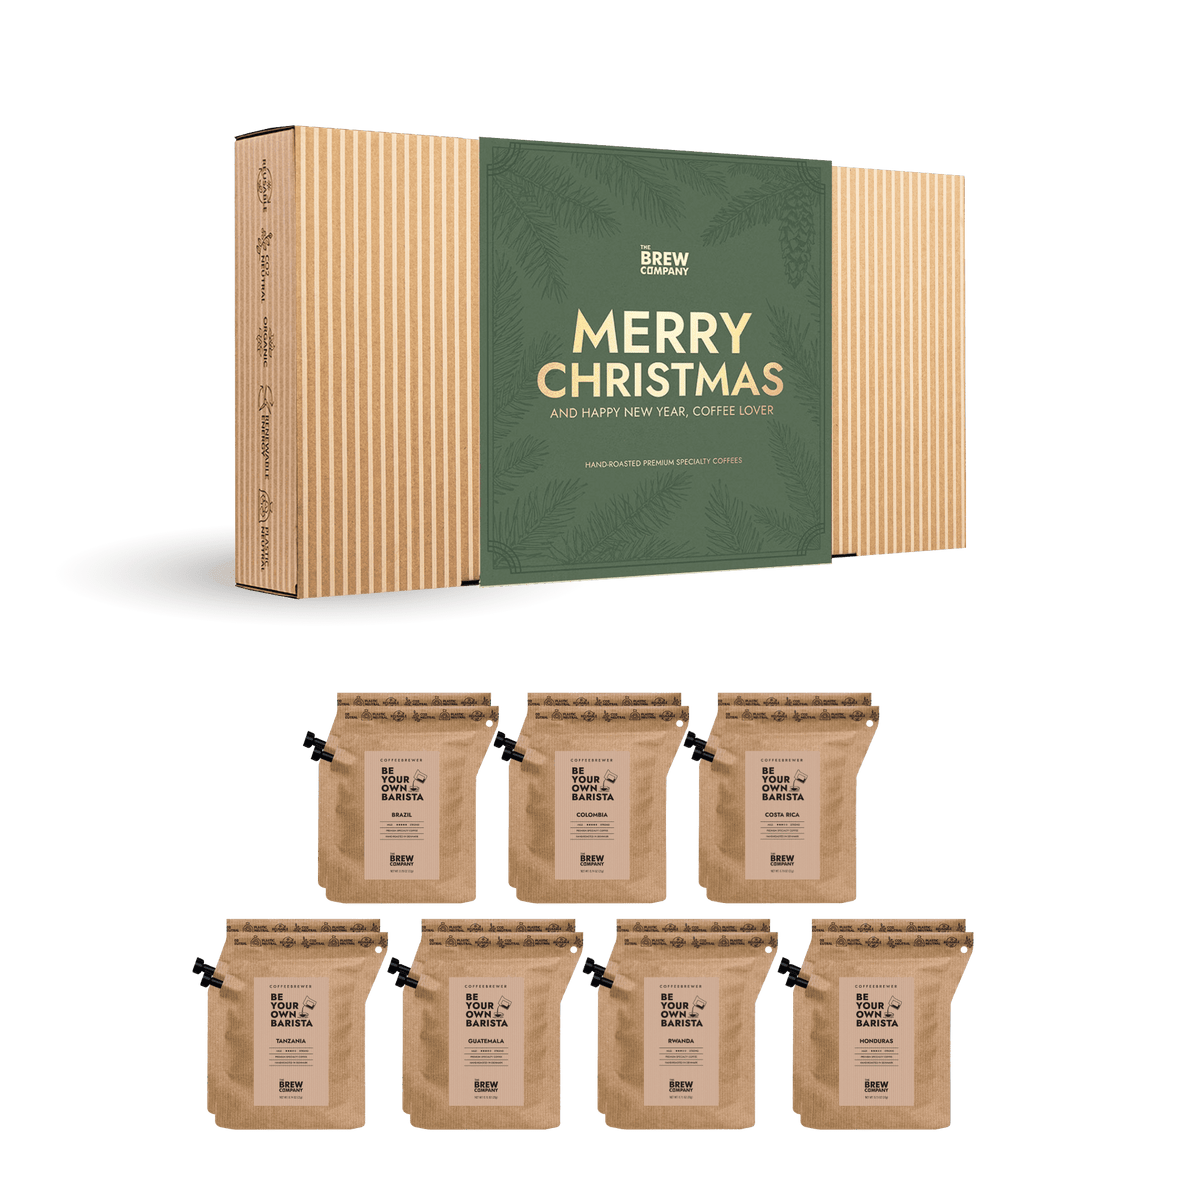 MERRY CHRISTMAS PREMIUM GIFT BOX Gift Boxes The Brew Company